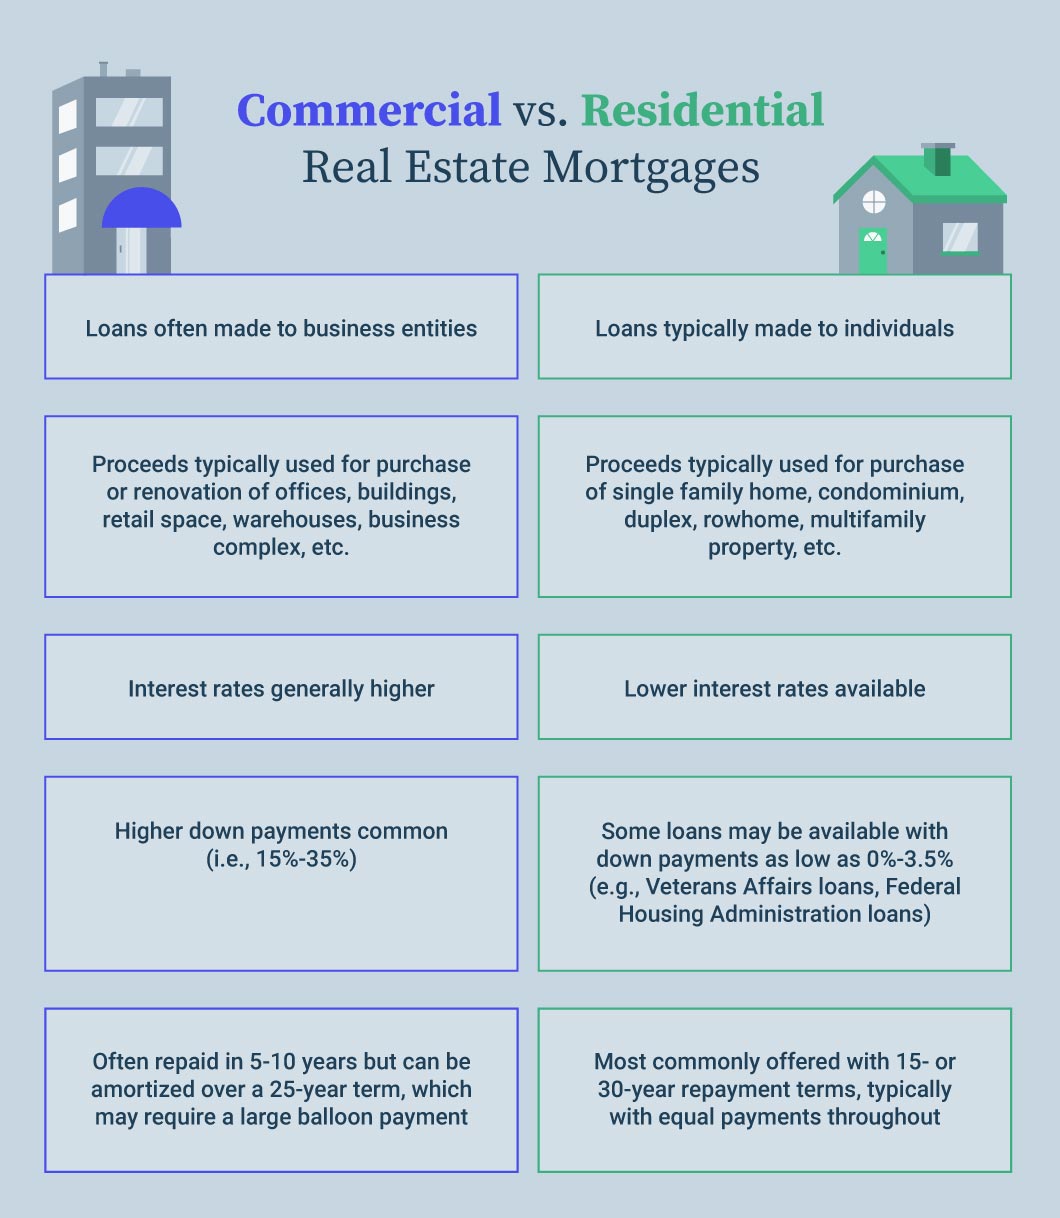 Table listing differences between commercial vs. residential real estate mortgages